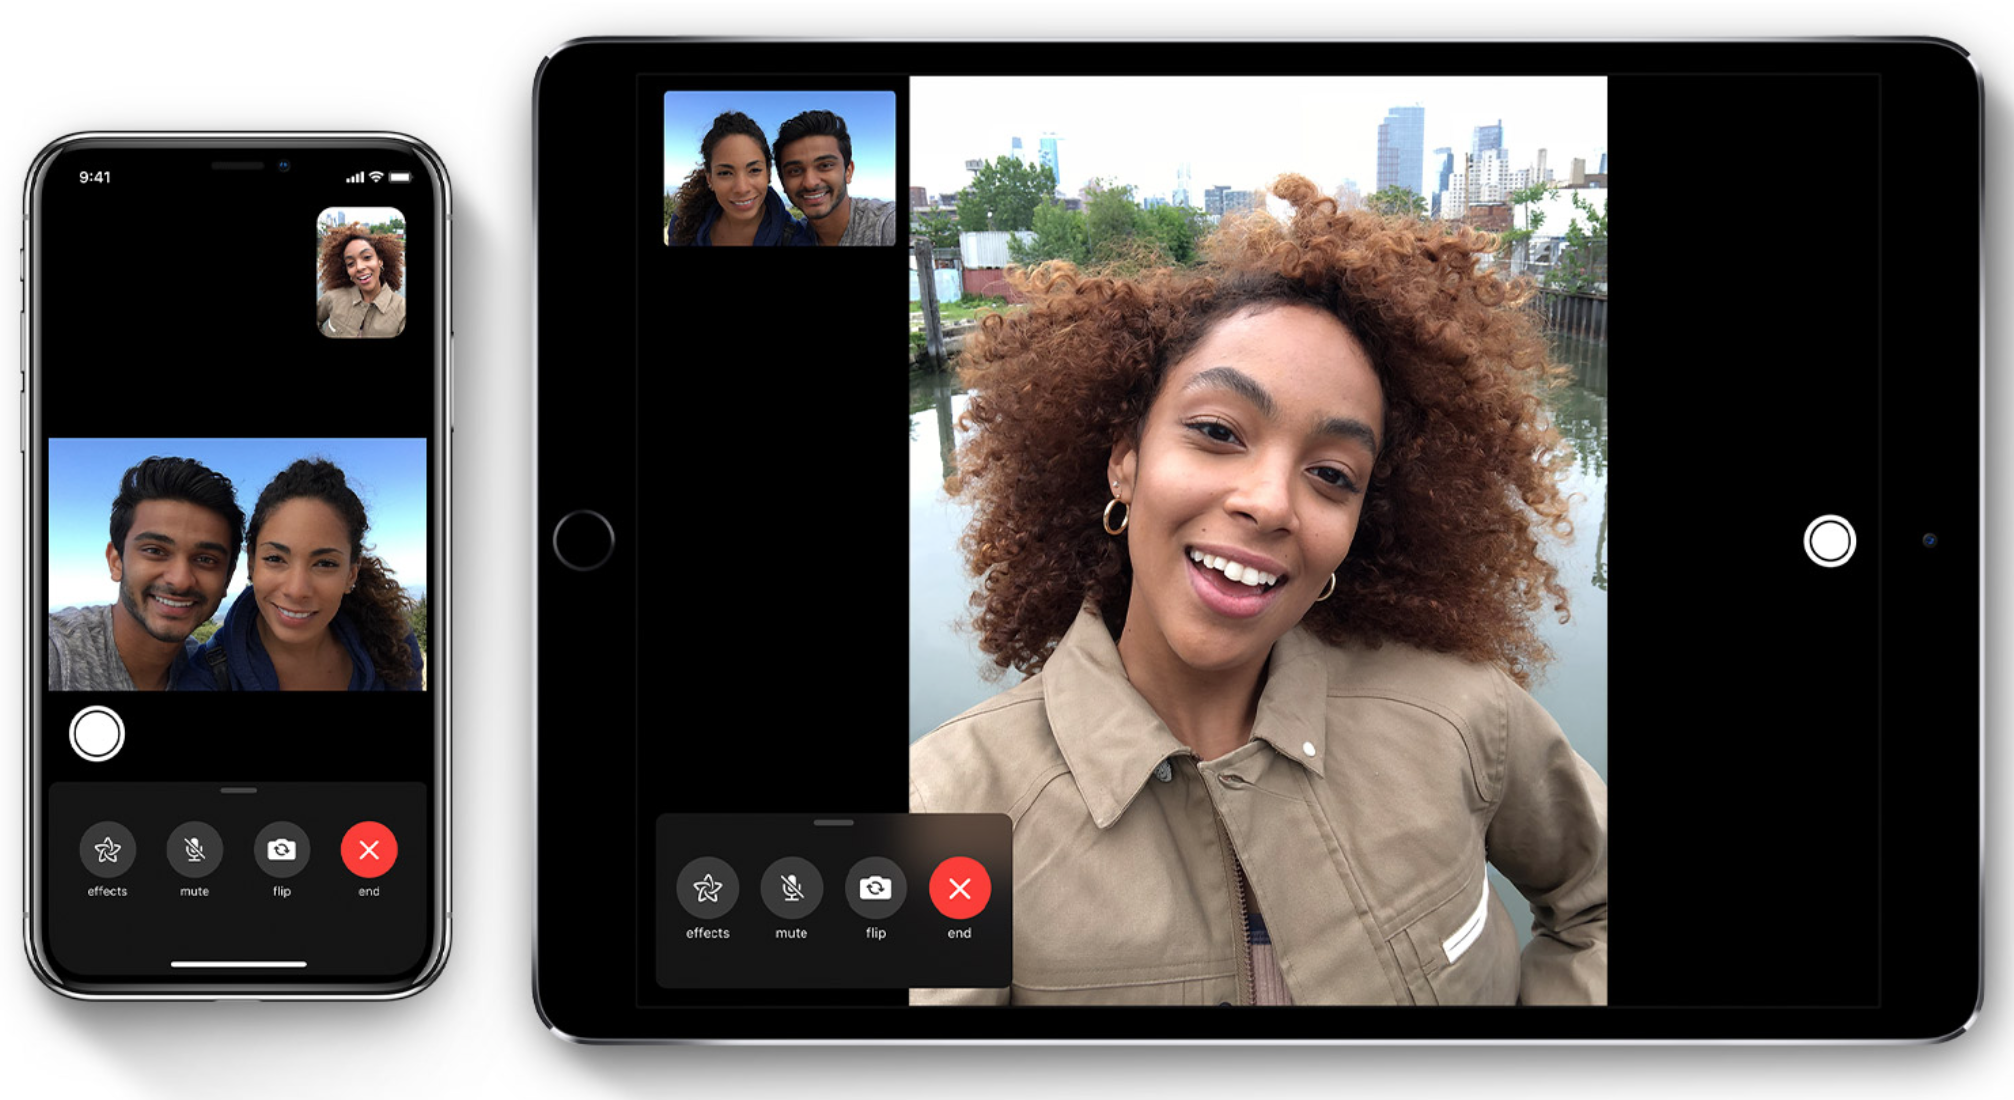 How to make a FaceTime call on iPhone, iPad, or Mac